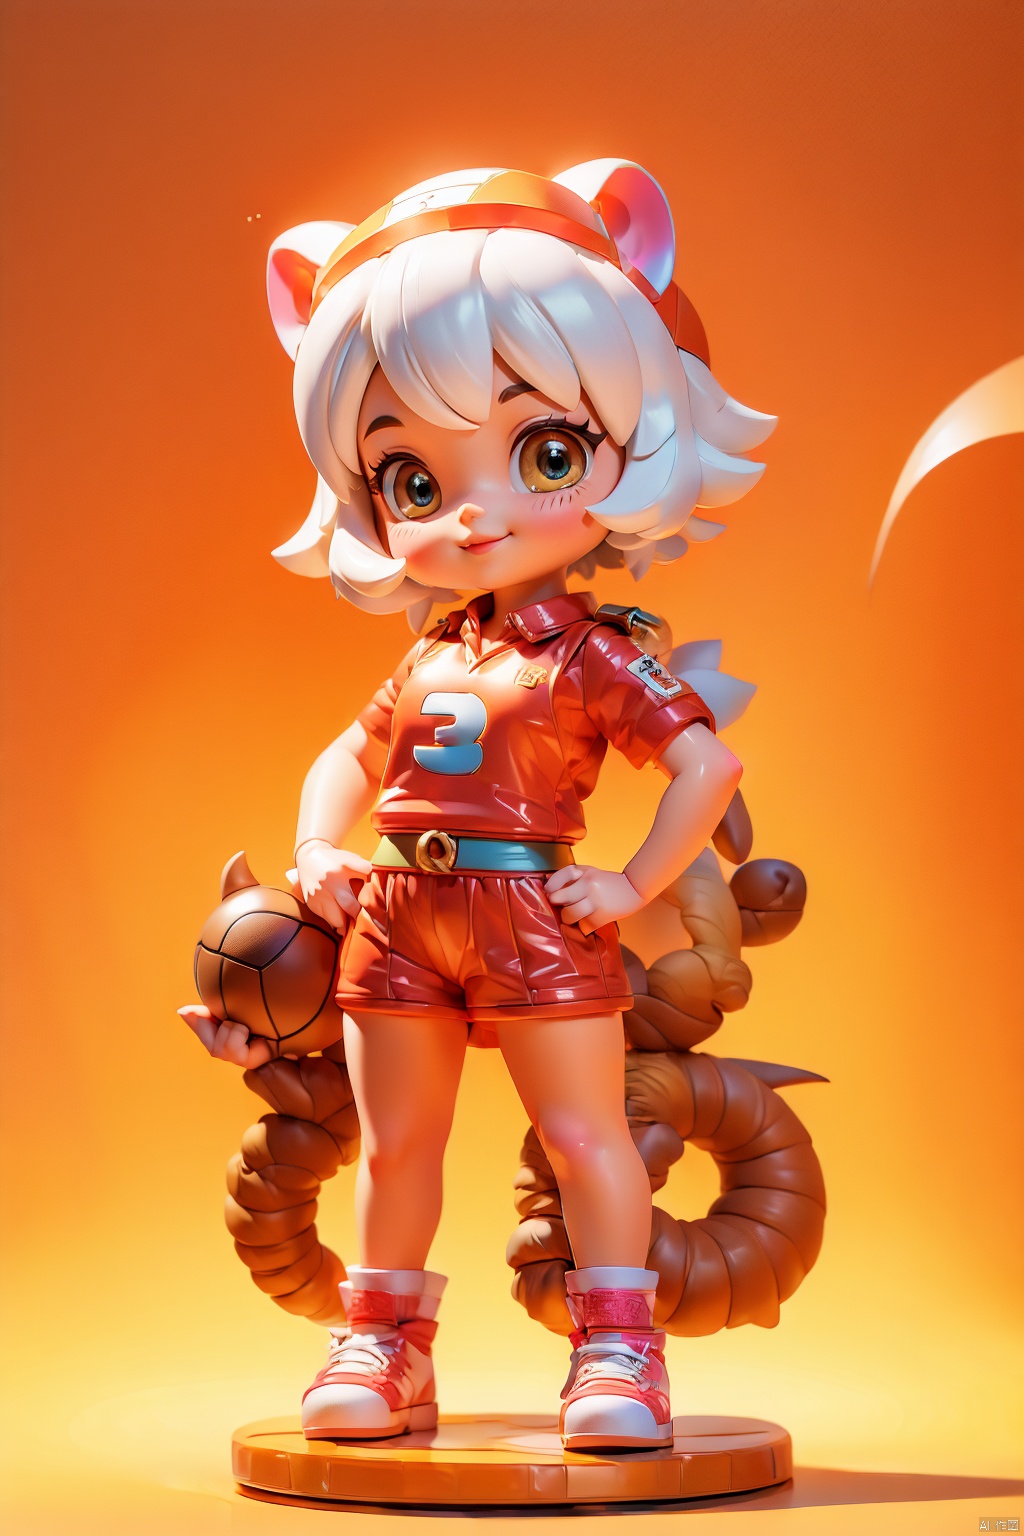  1 girl, (3 years :1.9), solo, (Q version :1.6), IP, determined expression, Mianyang horn, animal features, blush, basketball uniform, simple white background, white hair, hedgehog head, hands on hips